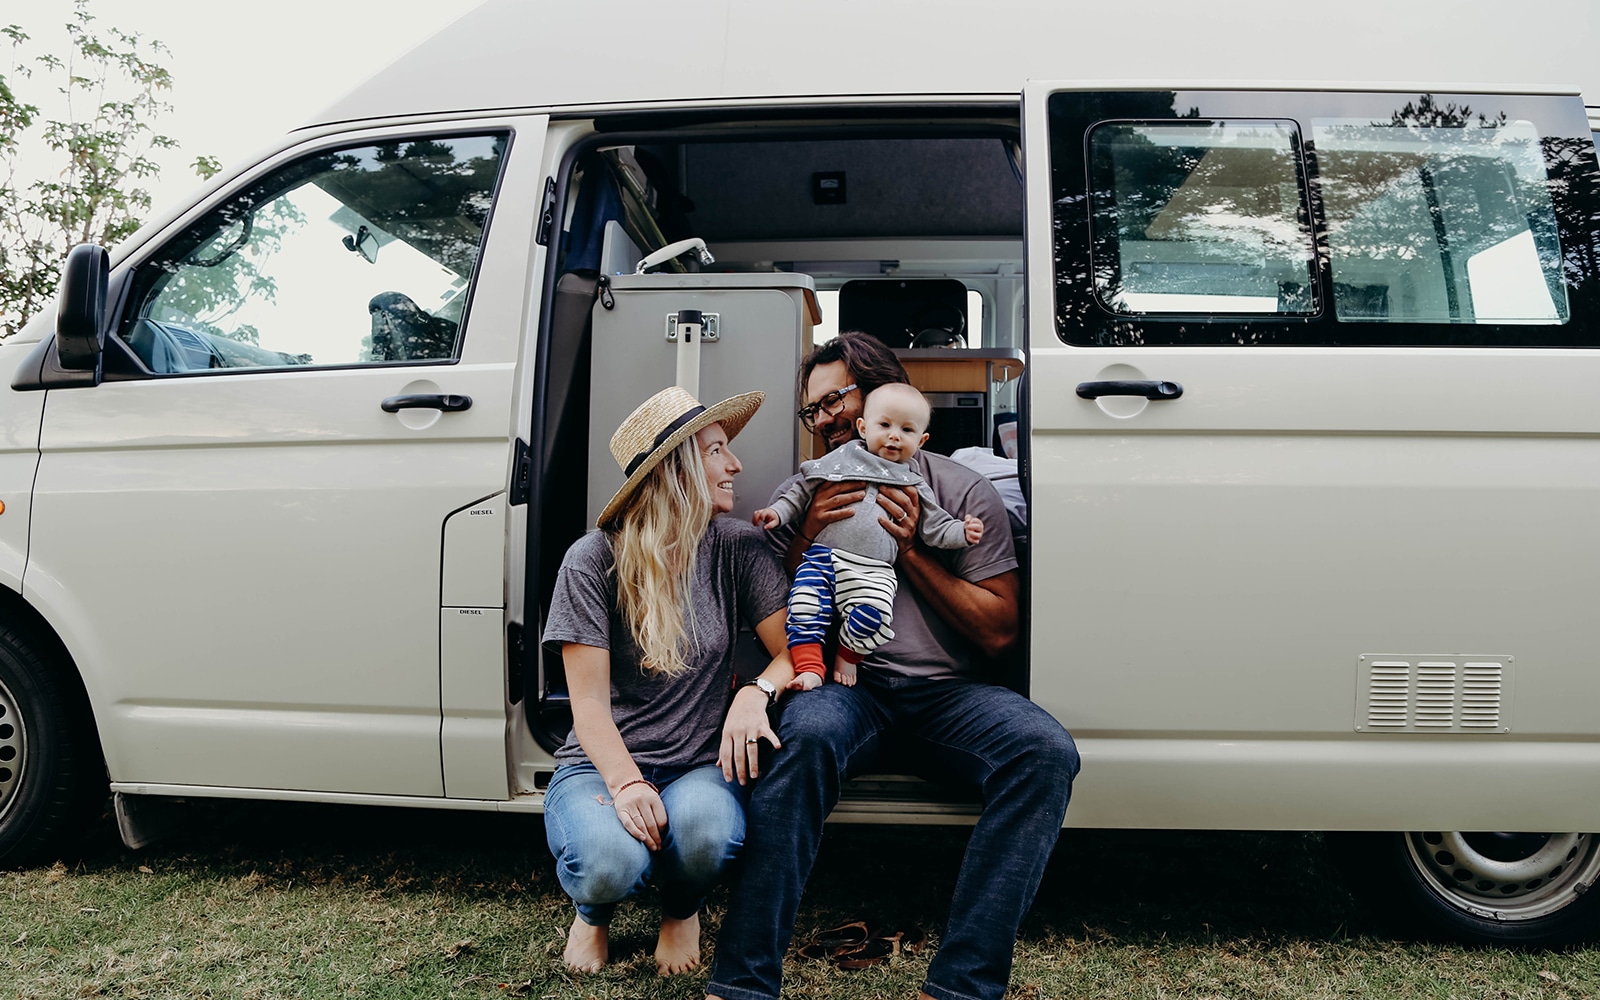 Traveling in New Zealand in a van with a baby. How an off season adventure created one wild and beautiful adventure living out of a van. Read this contributing post from Anelise Salvo on The Fresh Exchange.